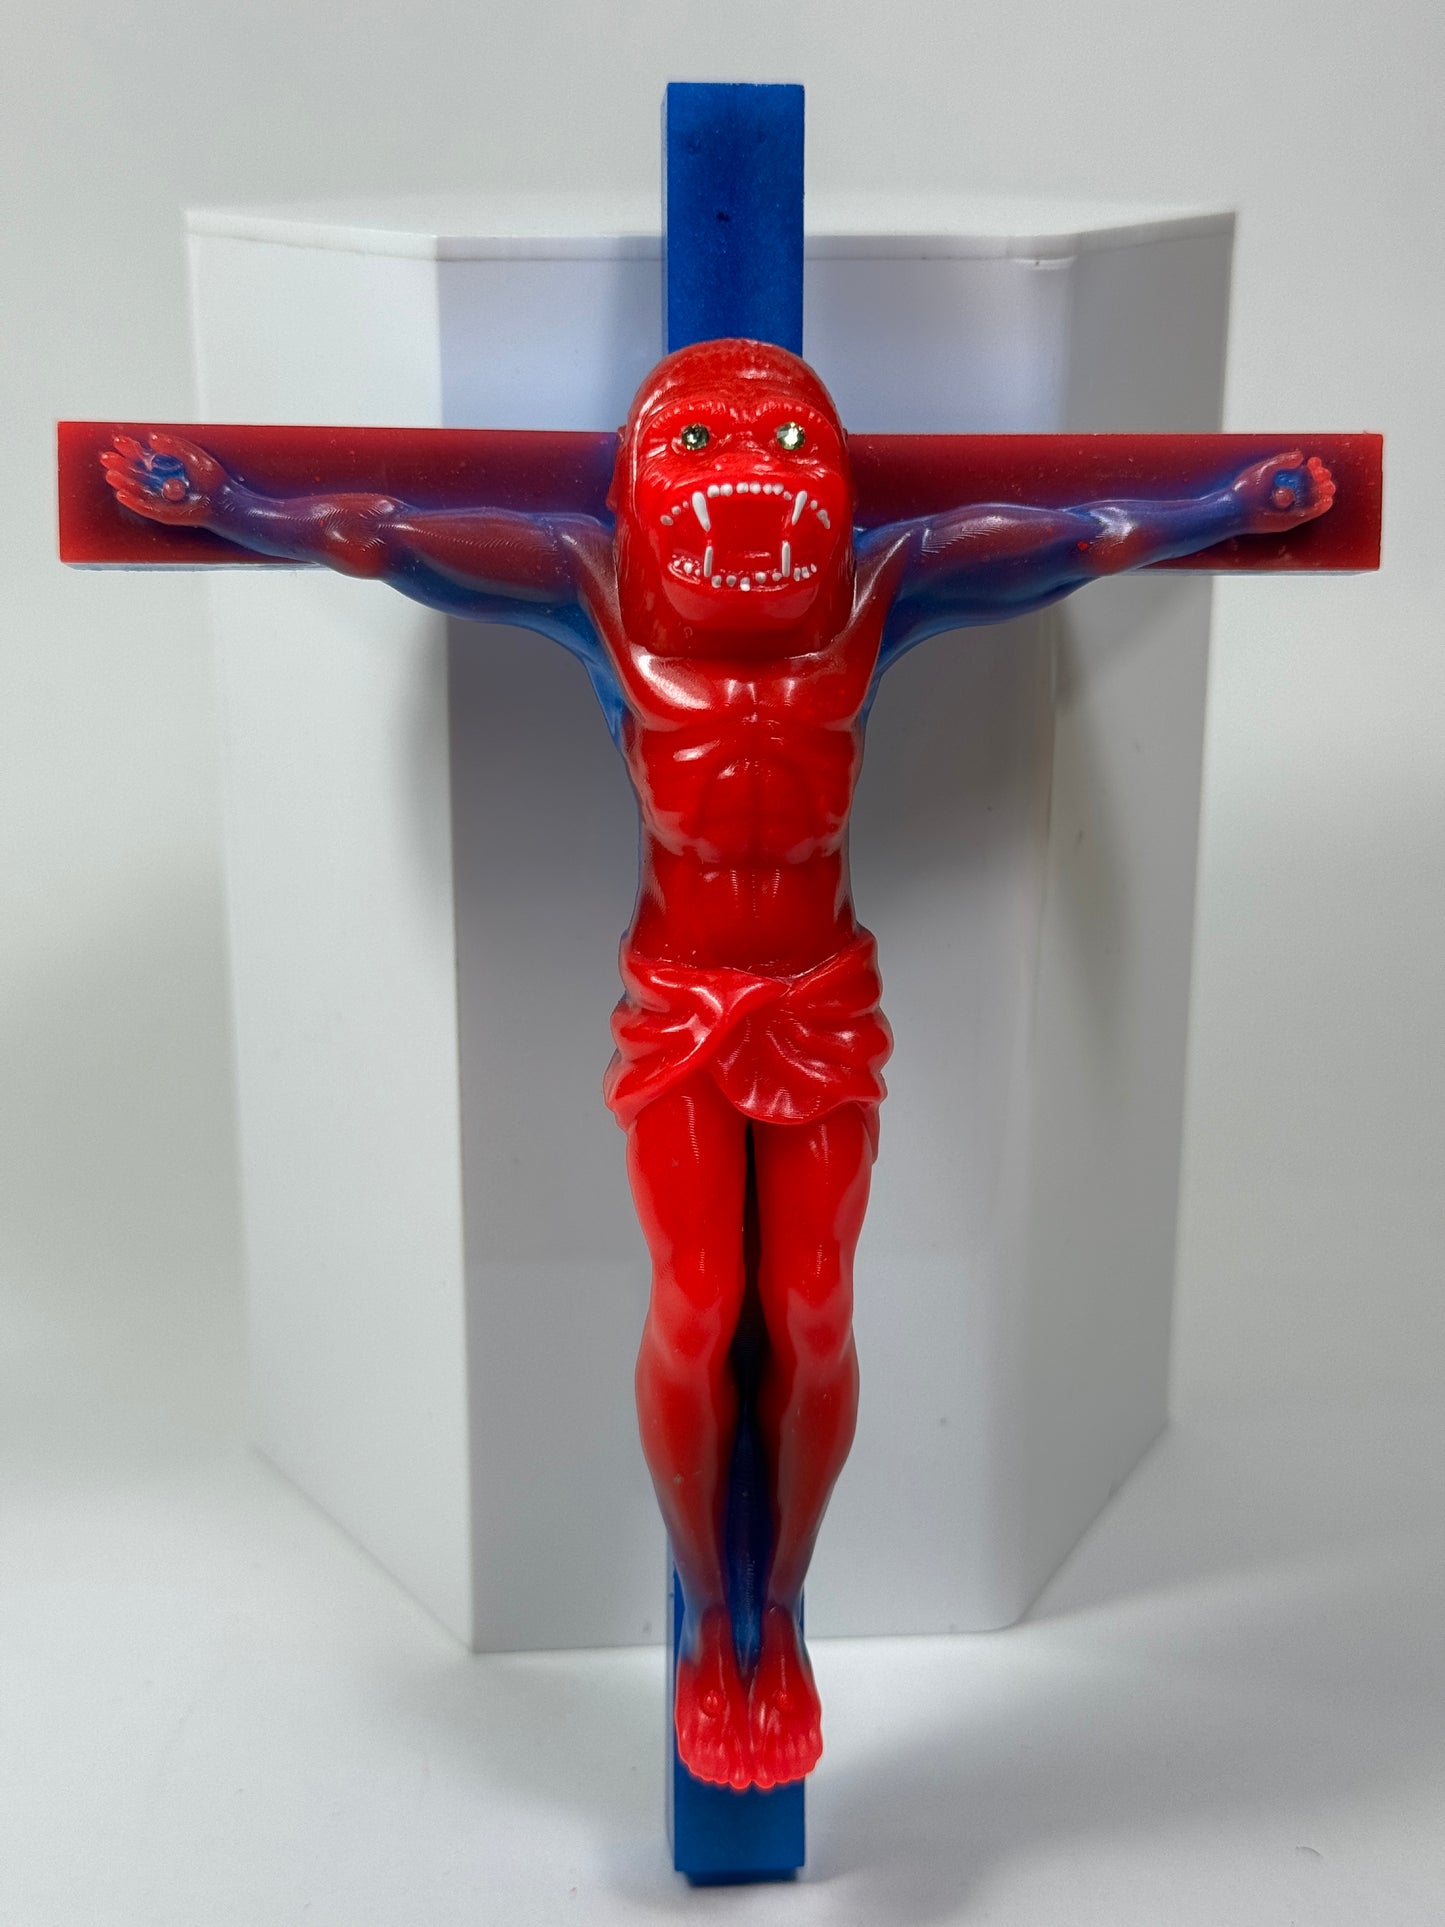 Christ on the Cross but he is an Ape, Magical Toy: God is a Mutation